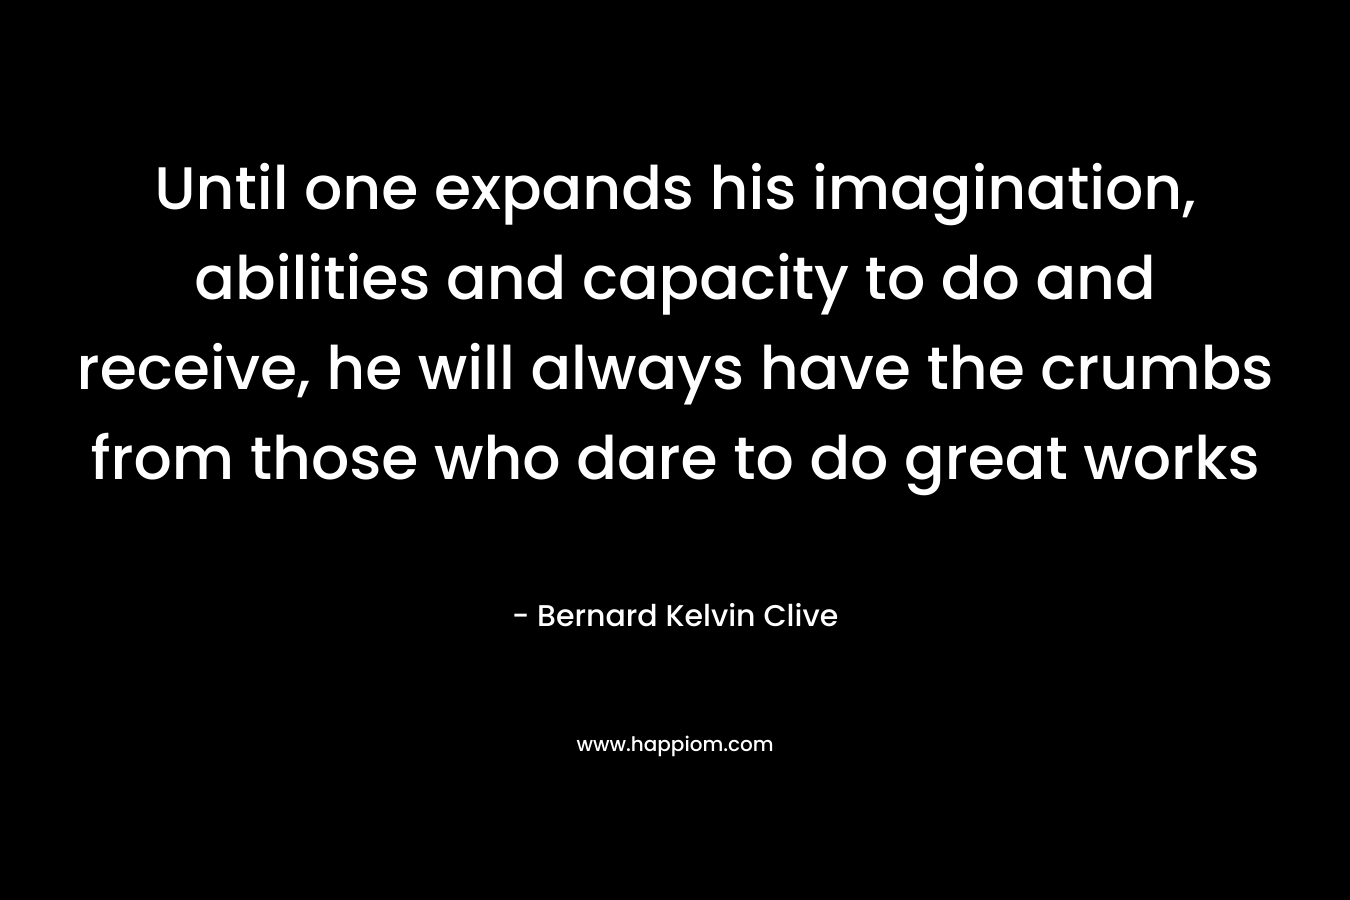 Until one expands his imagination, abilities and capacity to do and receive, he will always have the crumbs from those who dare to do great works